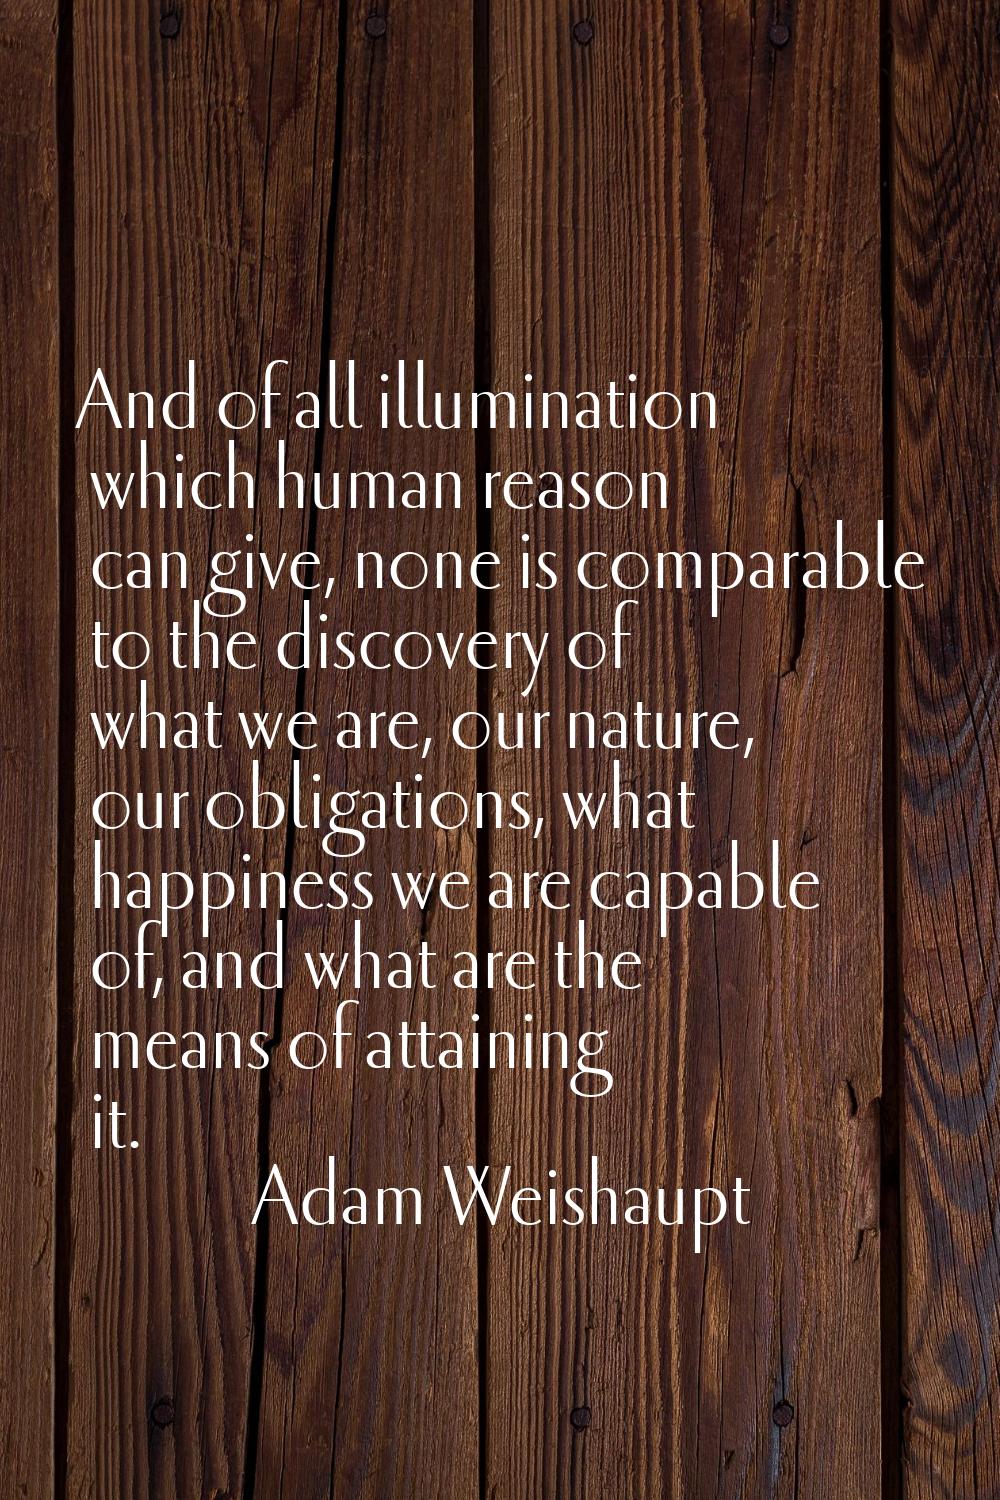 And of all illumination which human reason can give, none is comparable to the discovery of what we